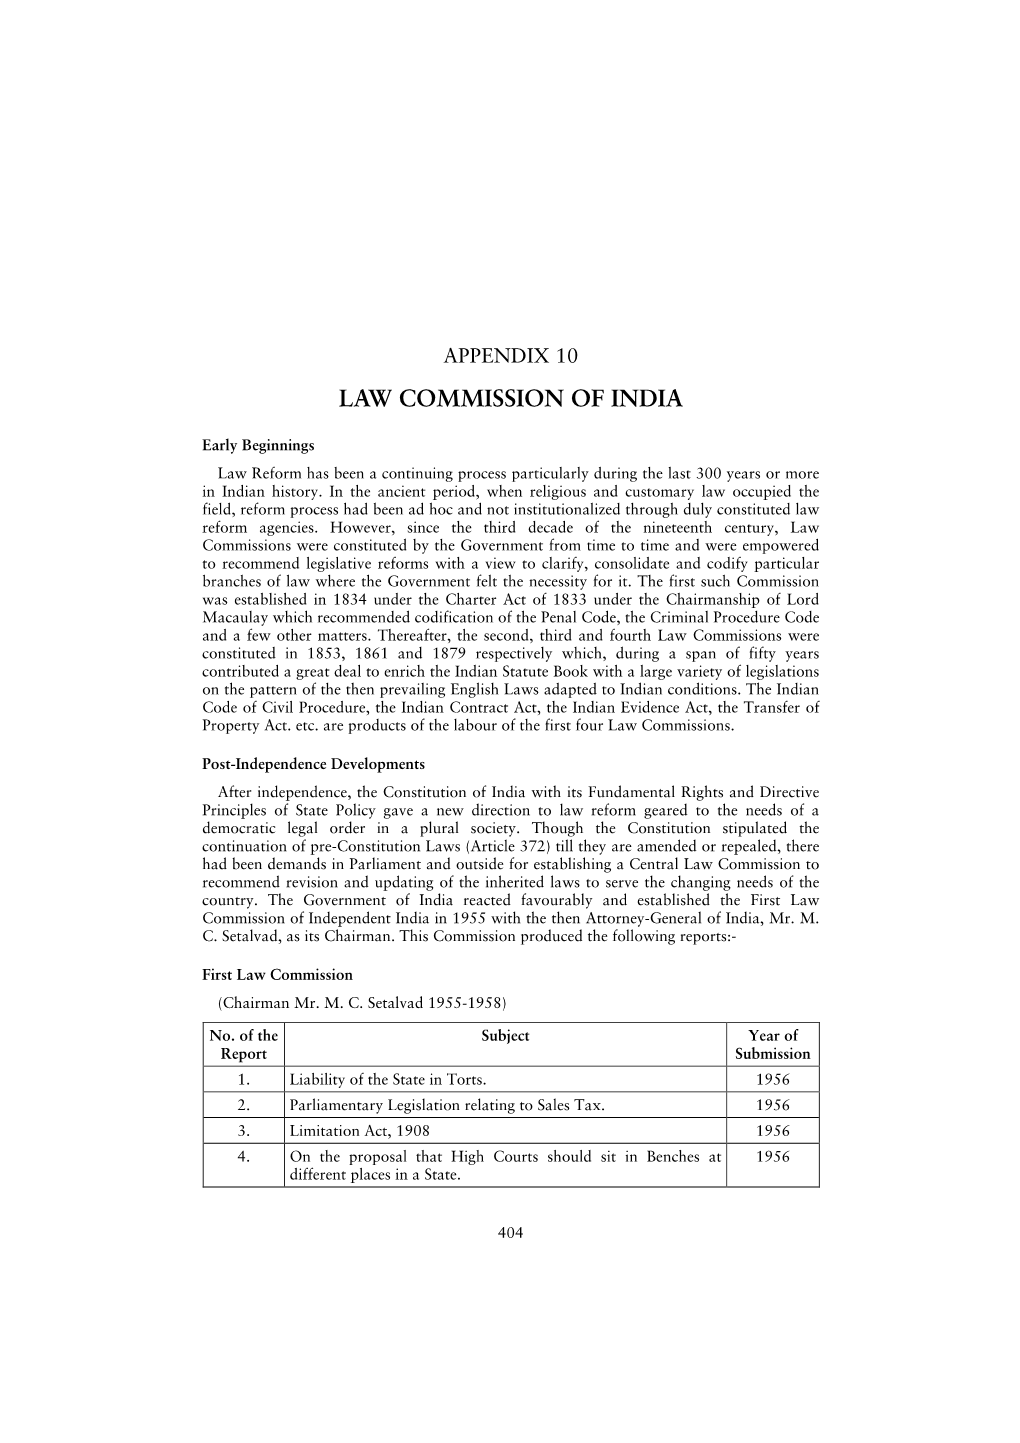 Appendix 10 Law Commission of India